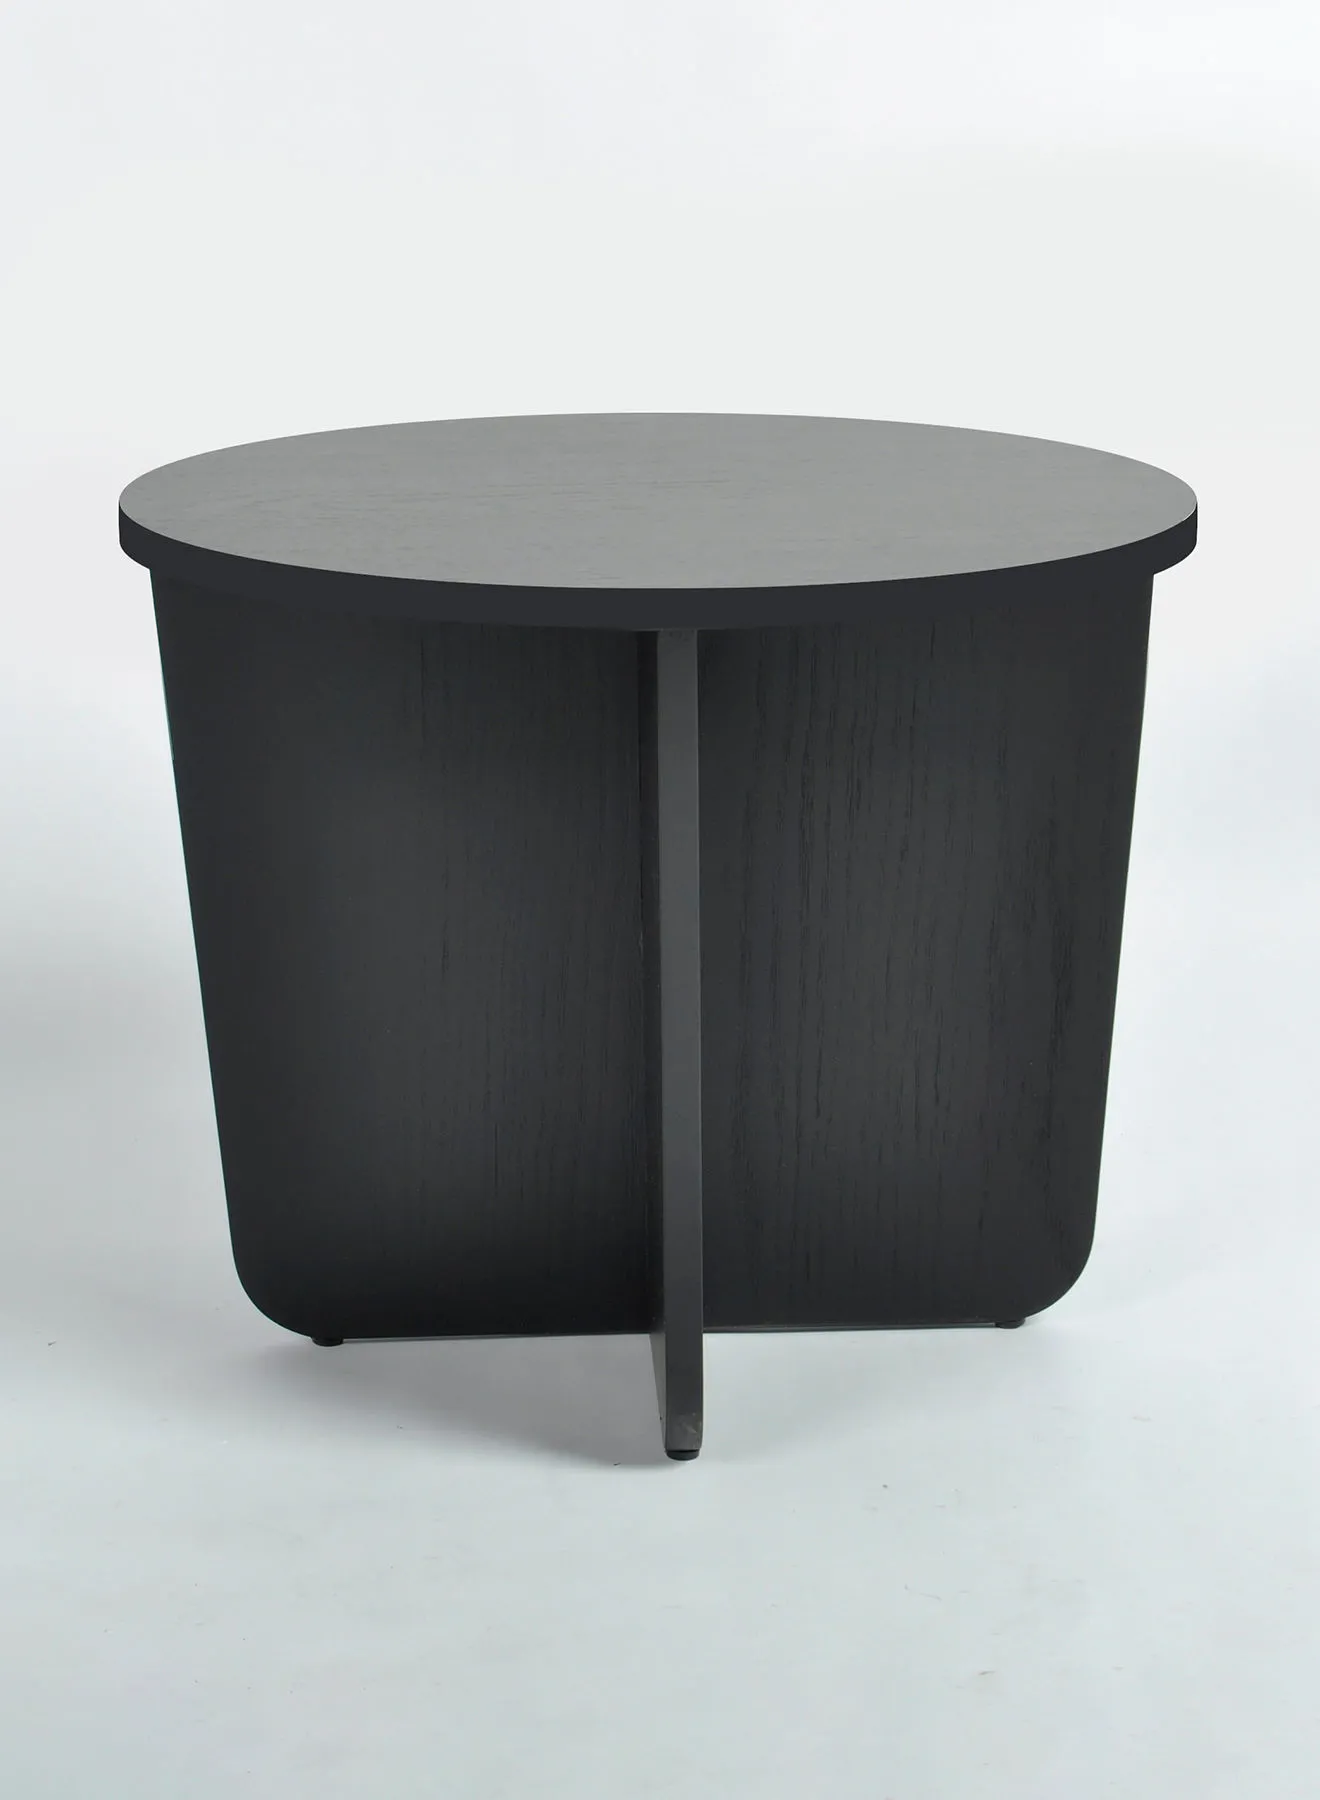 Switch Side Table - In Black - Used Next To Sofa As Coffee Corner